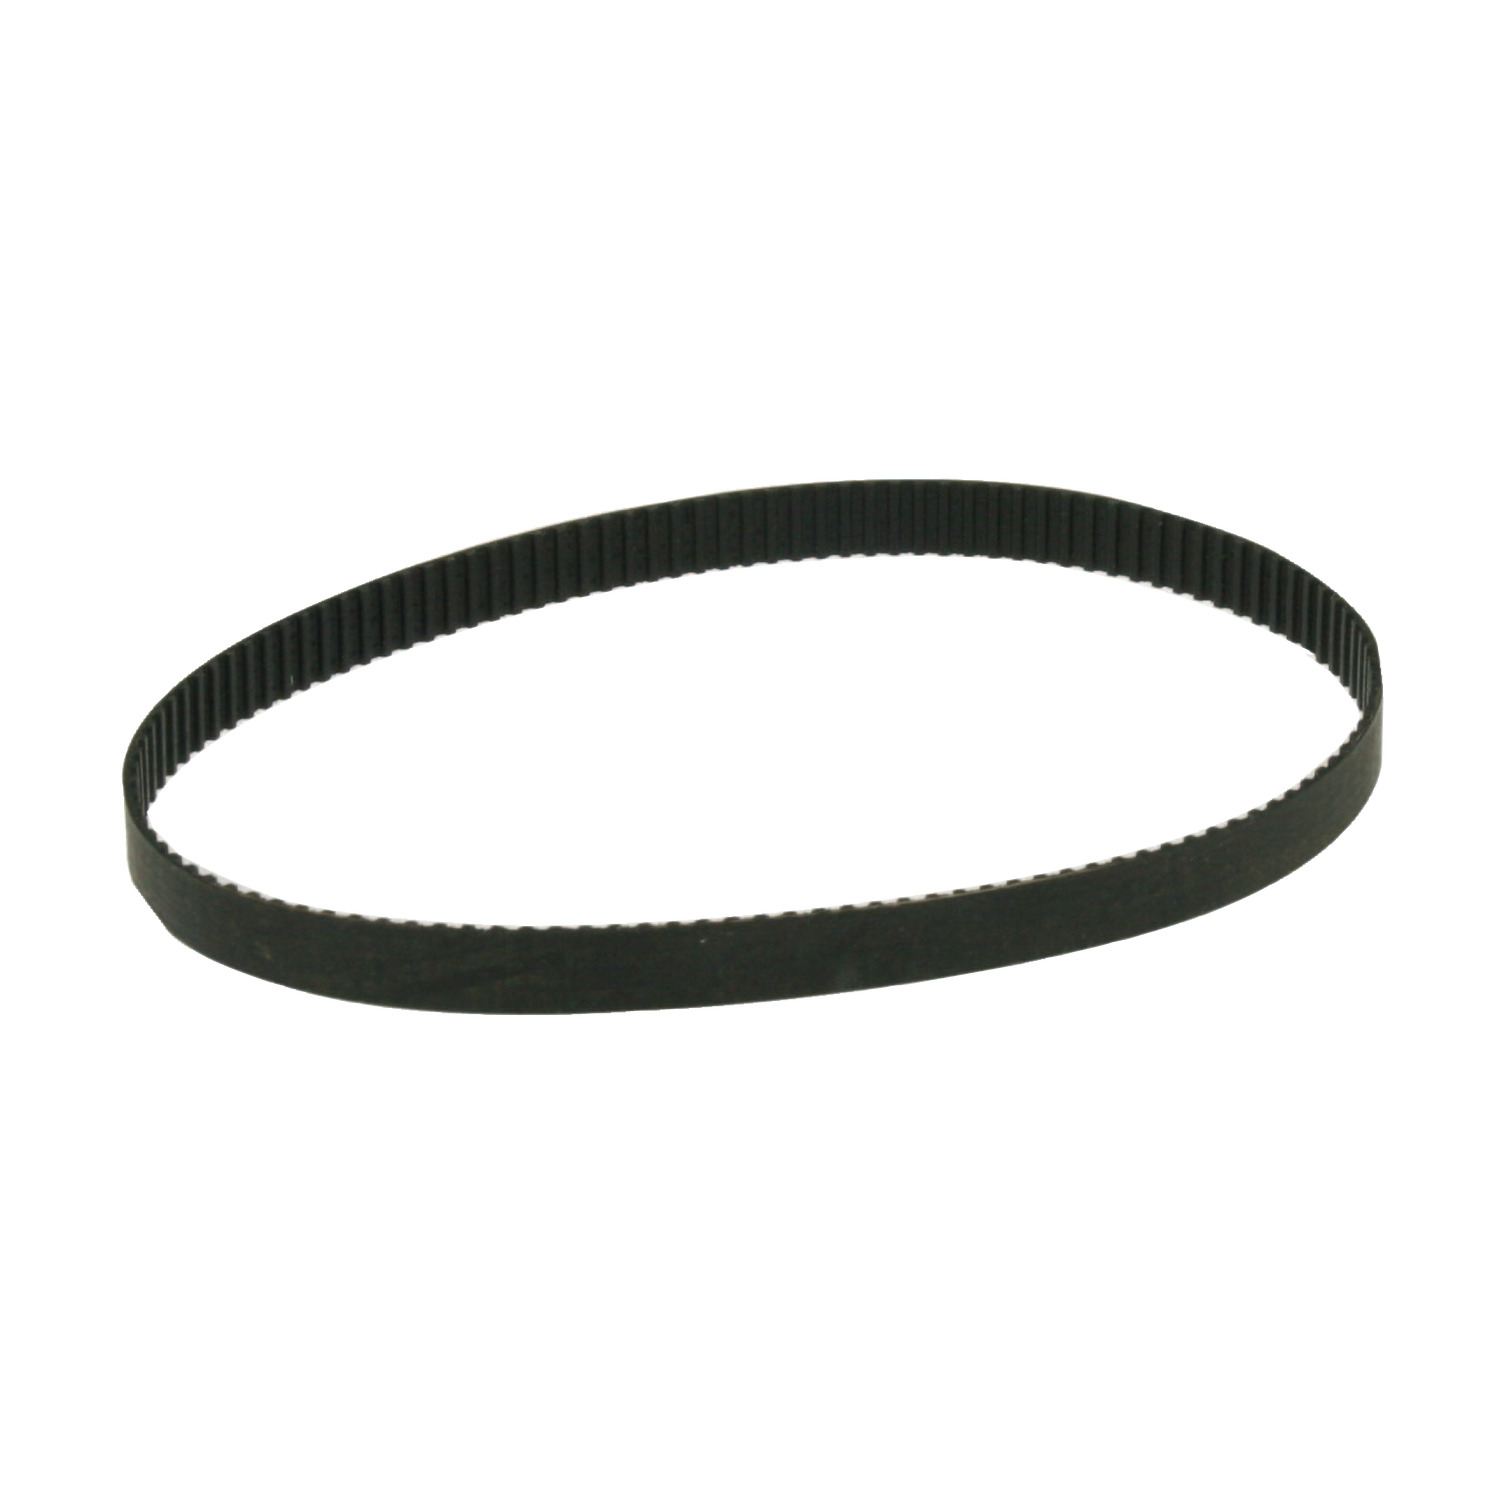 Product R1430.1, Timing Belts MXL - 2mm nominal circular pitch 3mm wide / 